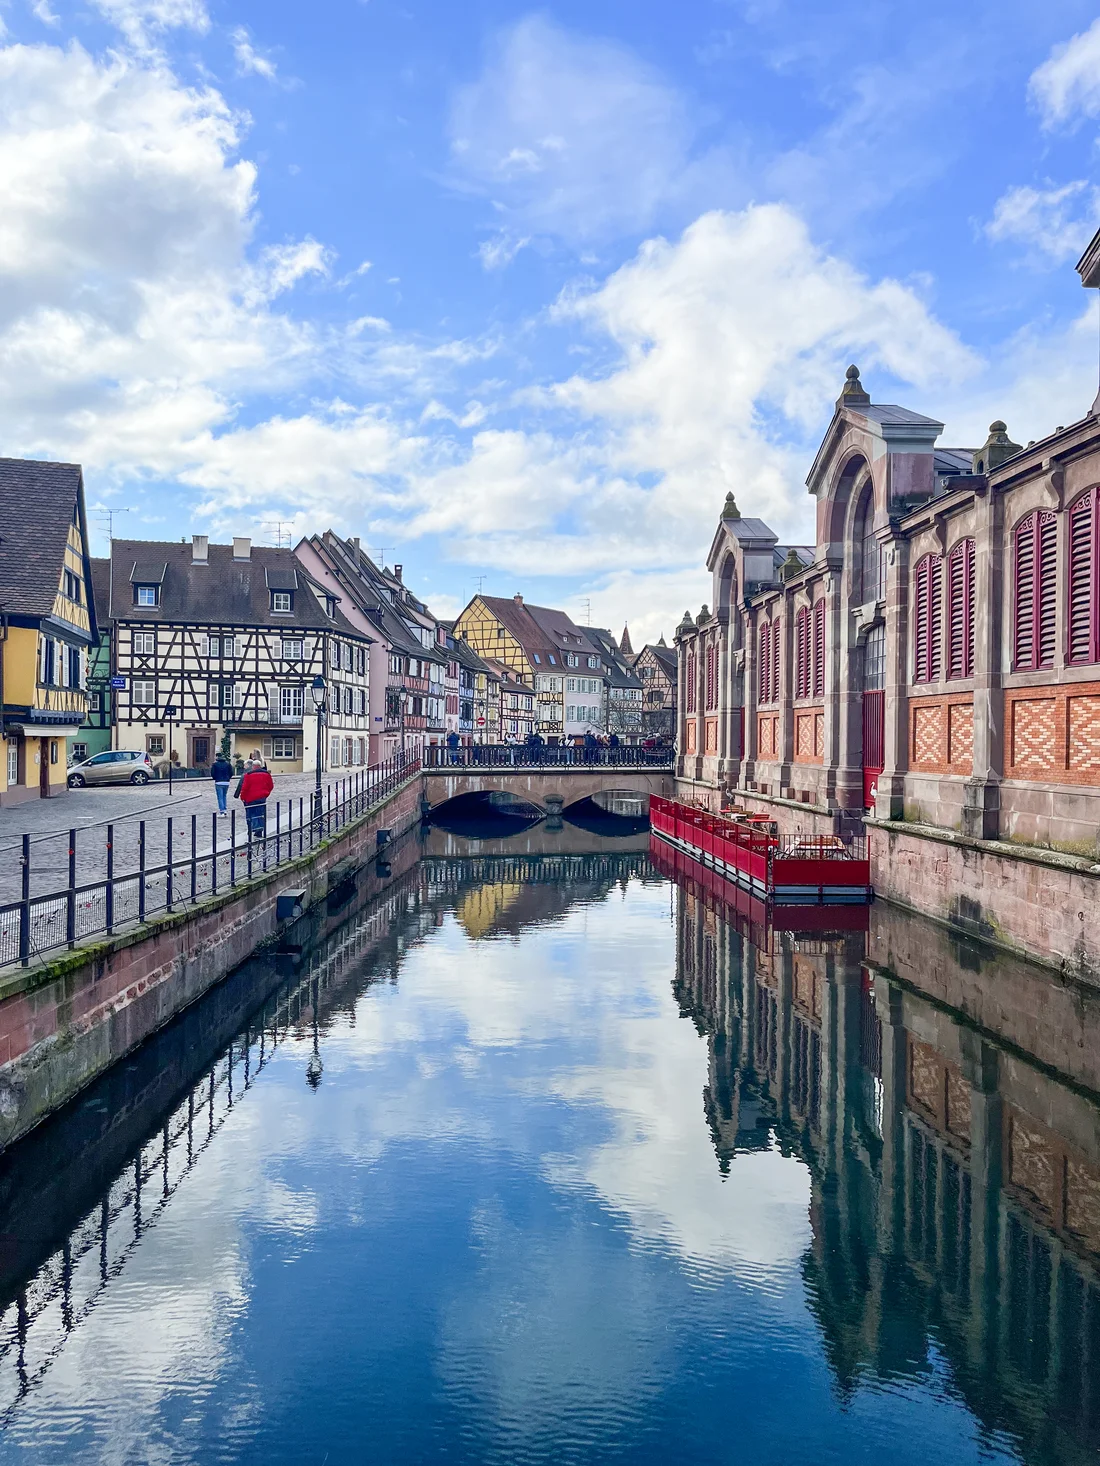 View of canal in Strasbourg.